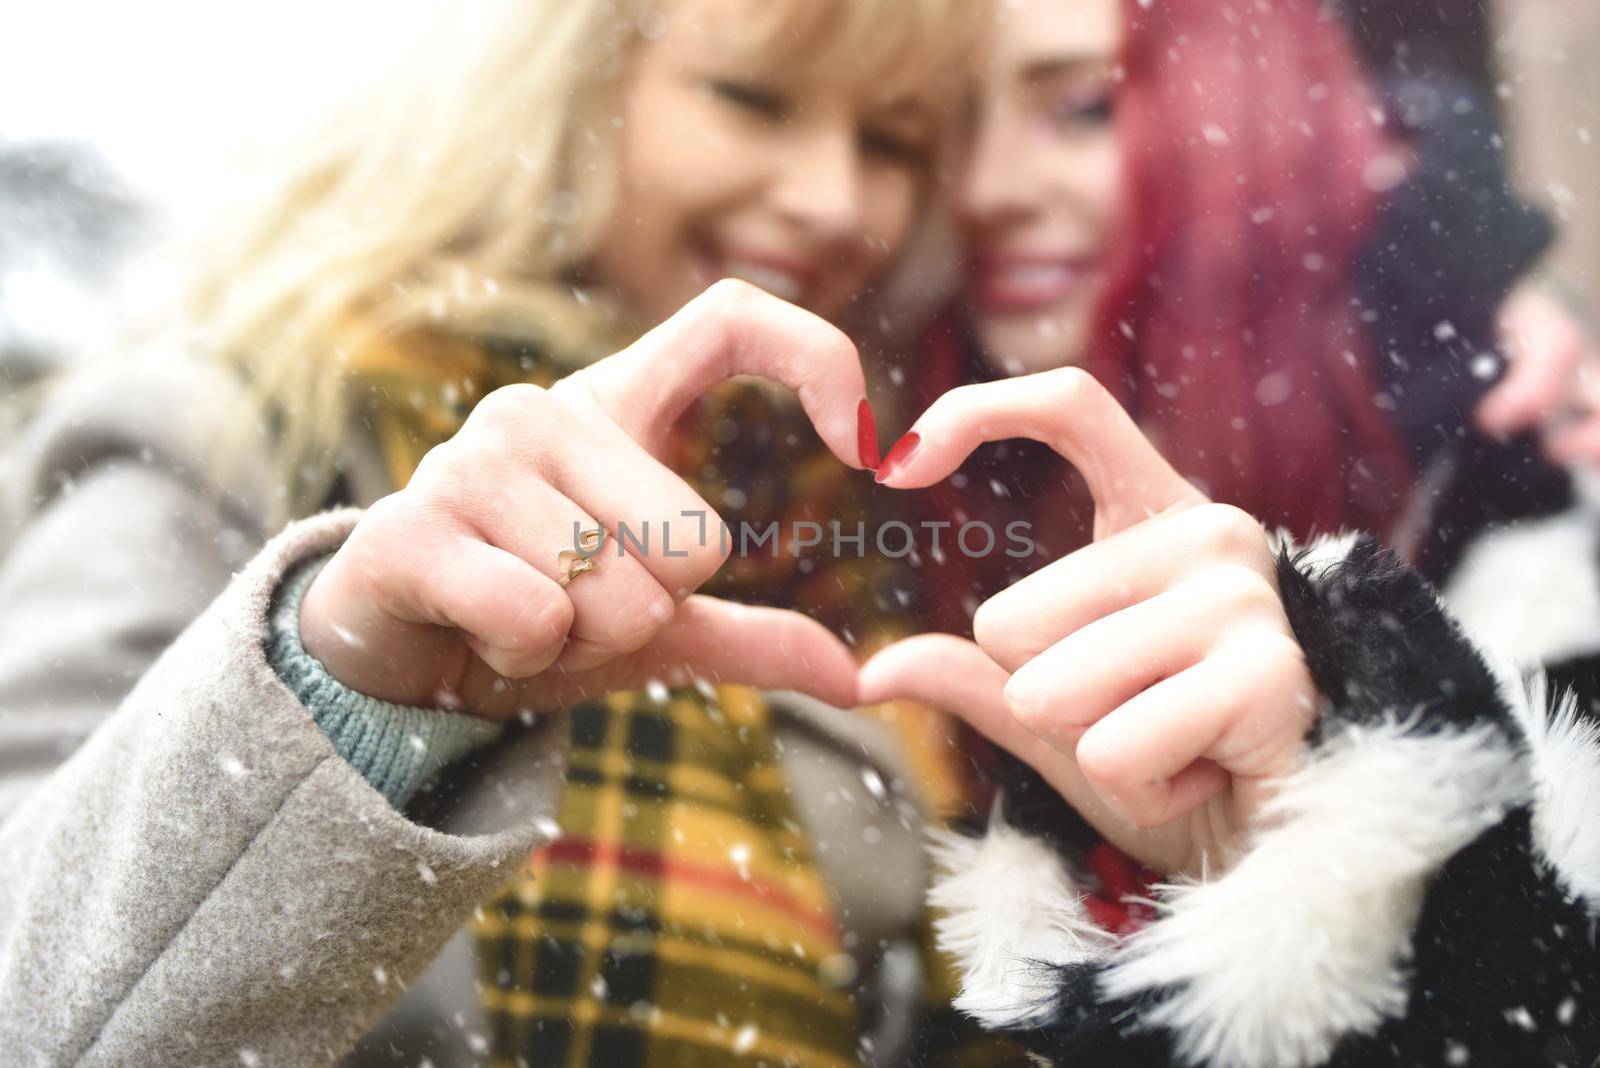 Lesbian couple making heart with hands, open relationship in same-sex love. best Girlfriends. Friendship concept. by Nickstock